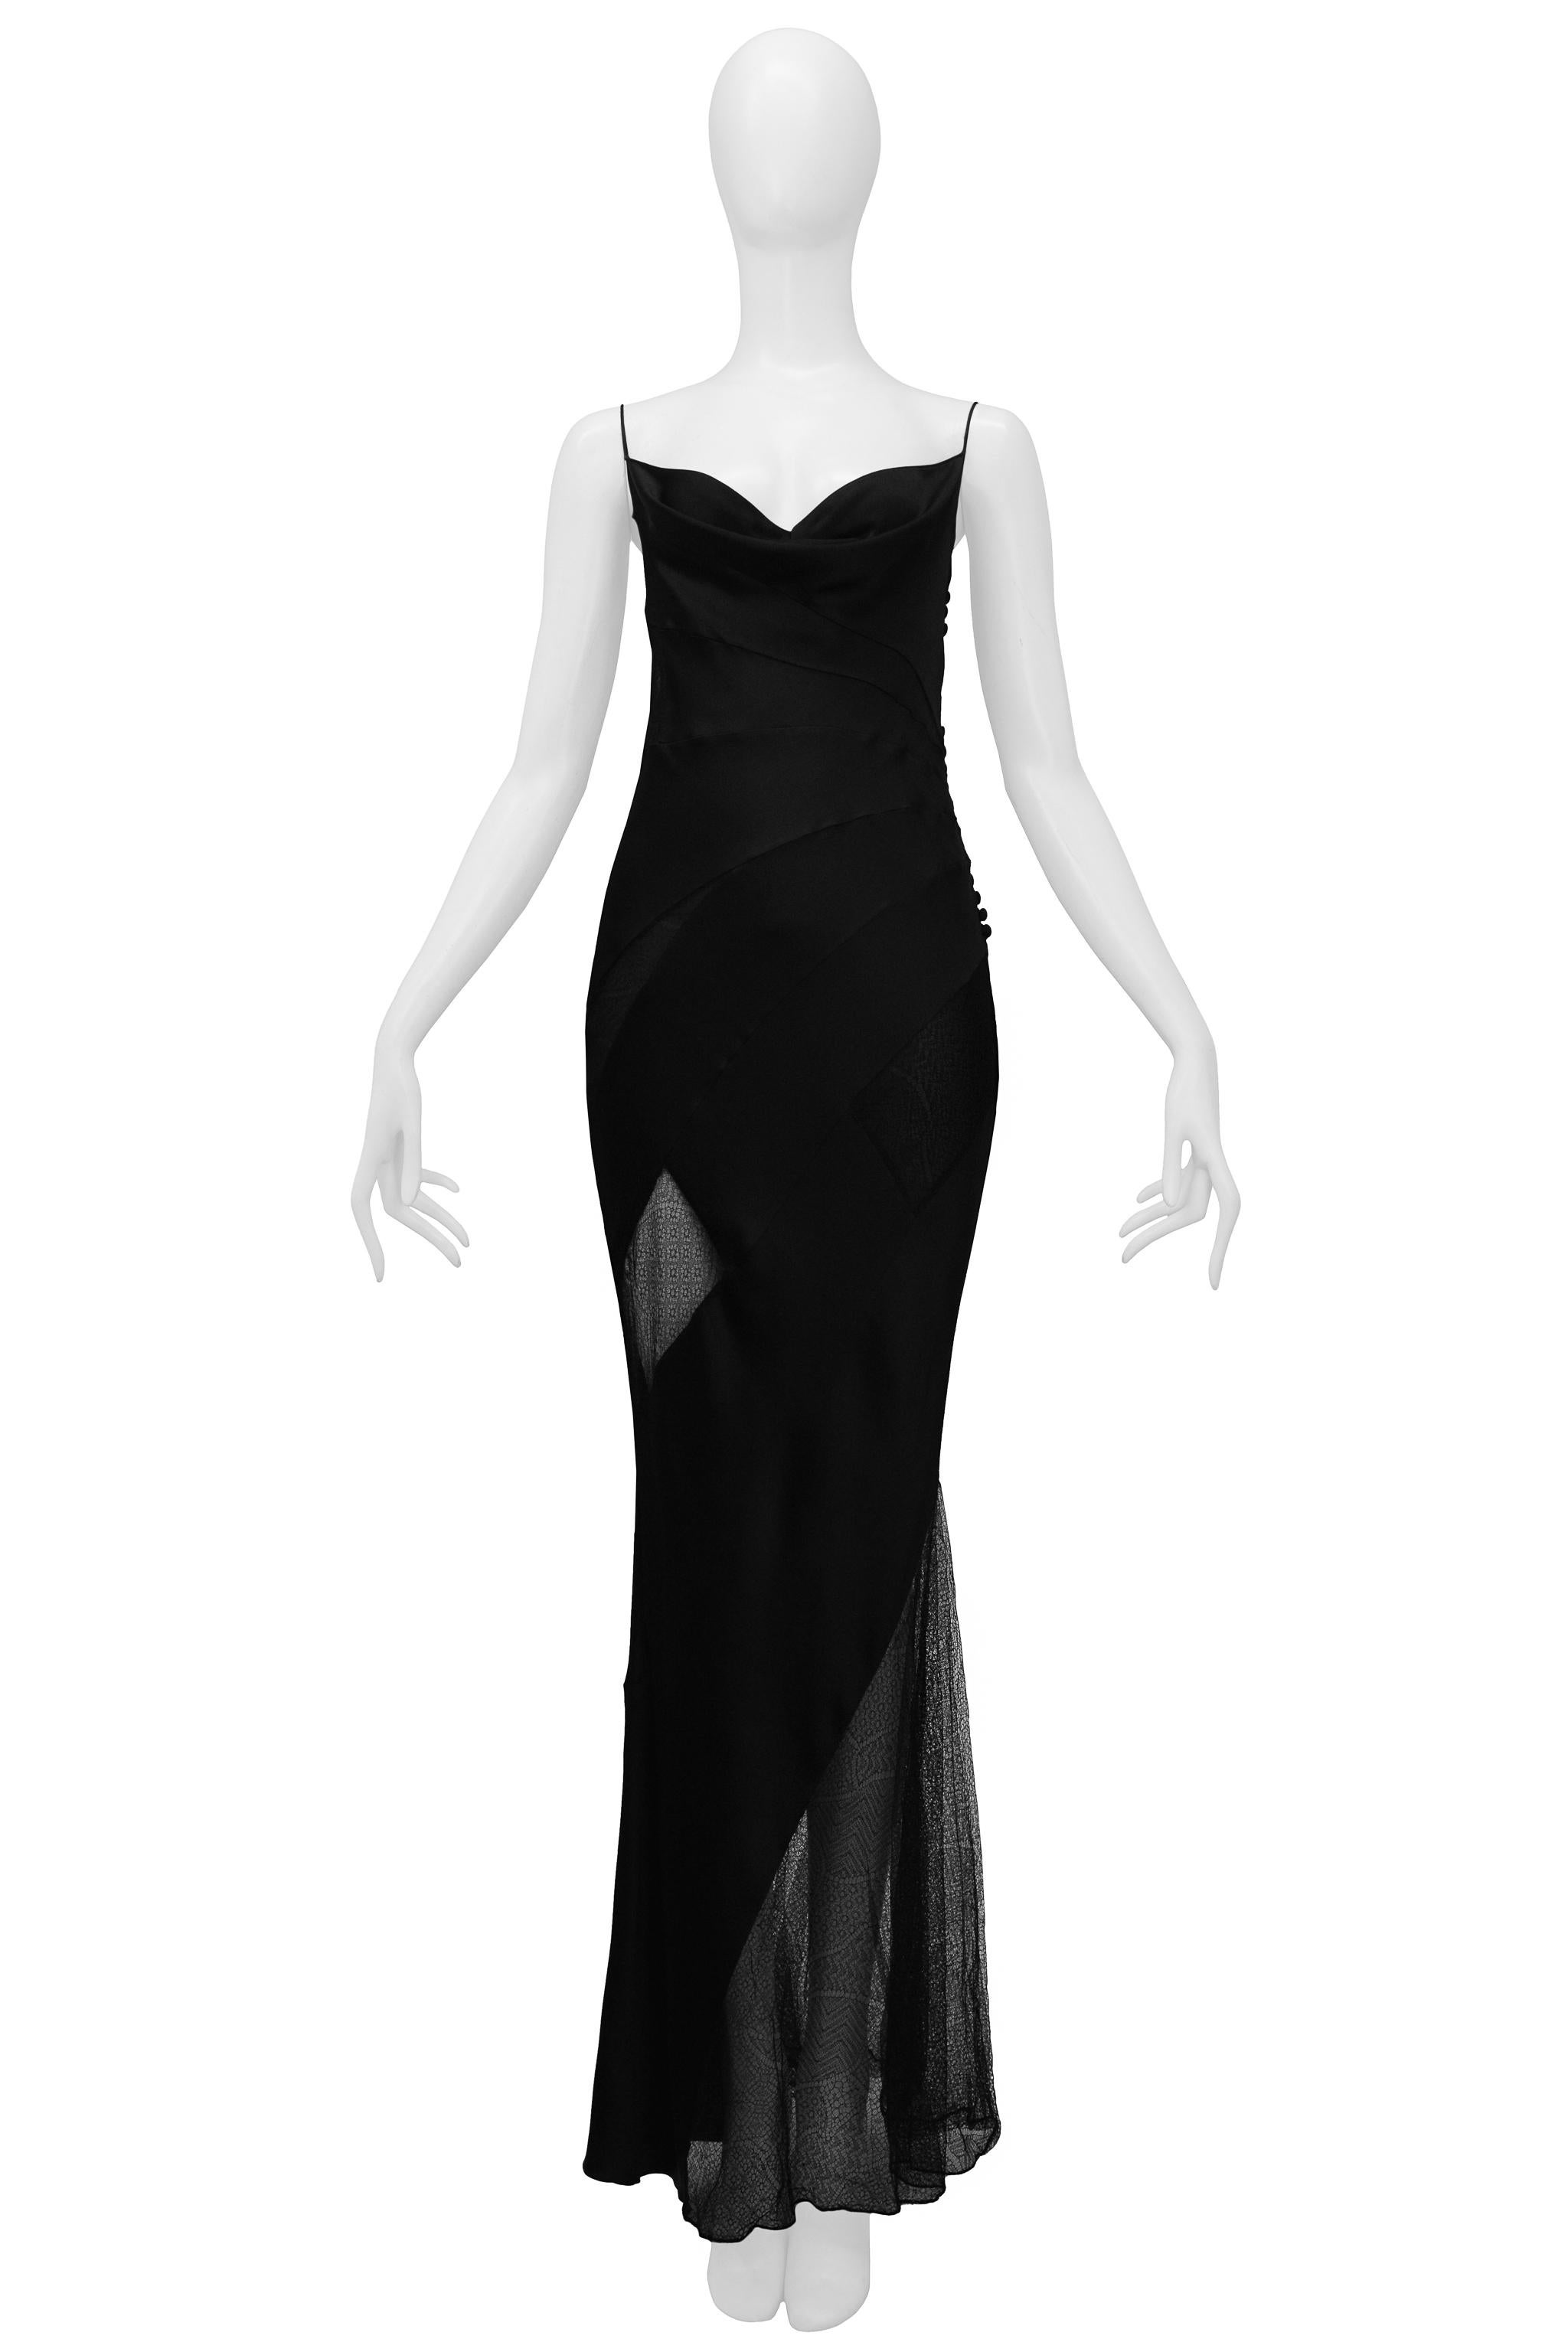 Resurrection is excited to offer this vintage Christian Dior black evening gown featuring lace insets, spaghetti straps, asymmetrical sheer mesh side skirt panel, and side button closure.

Christian Dior Paris
Designed by John Galliano
Size 40
Silk